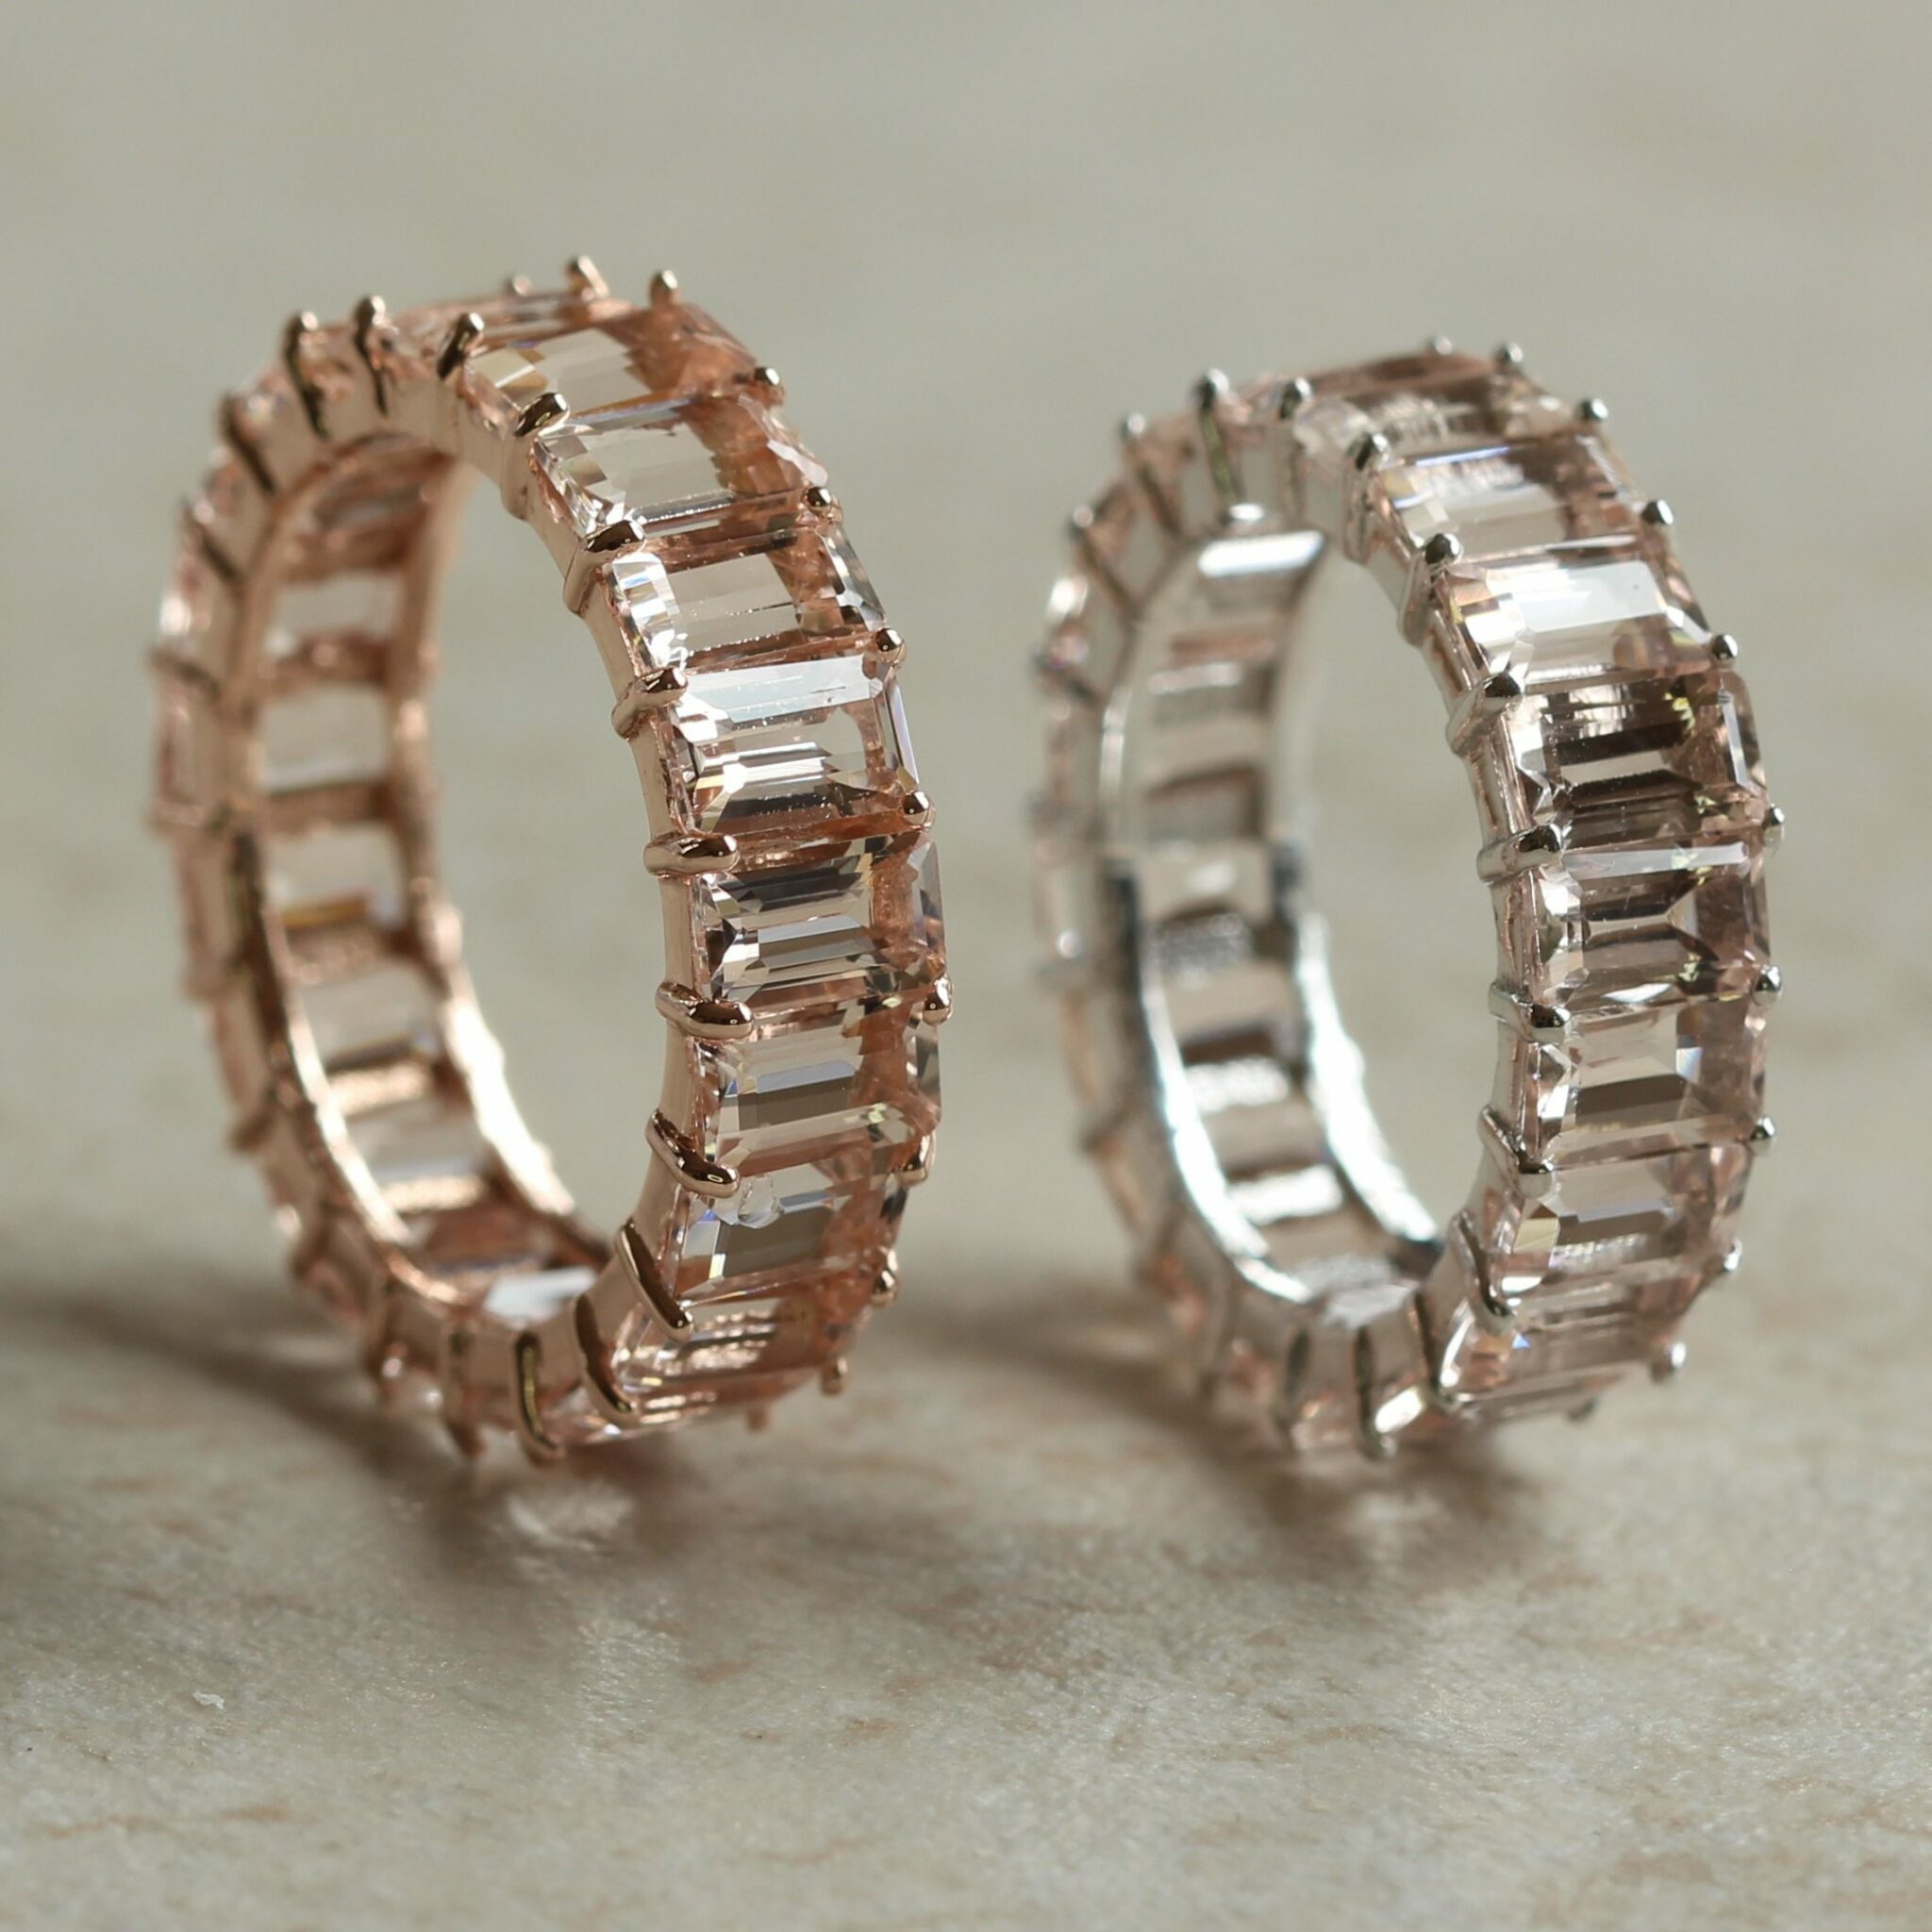 How-does-Morganite-look-in-rose-gold-versus-white-gold-LS5934-2